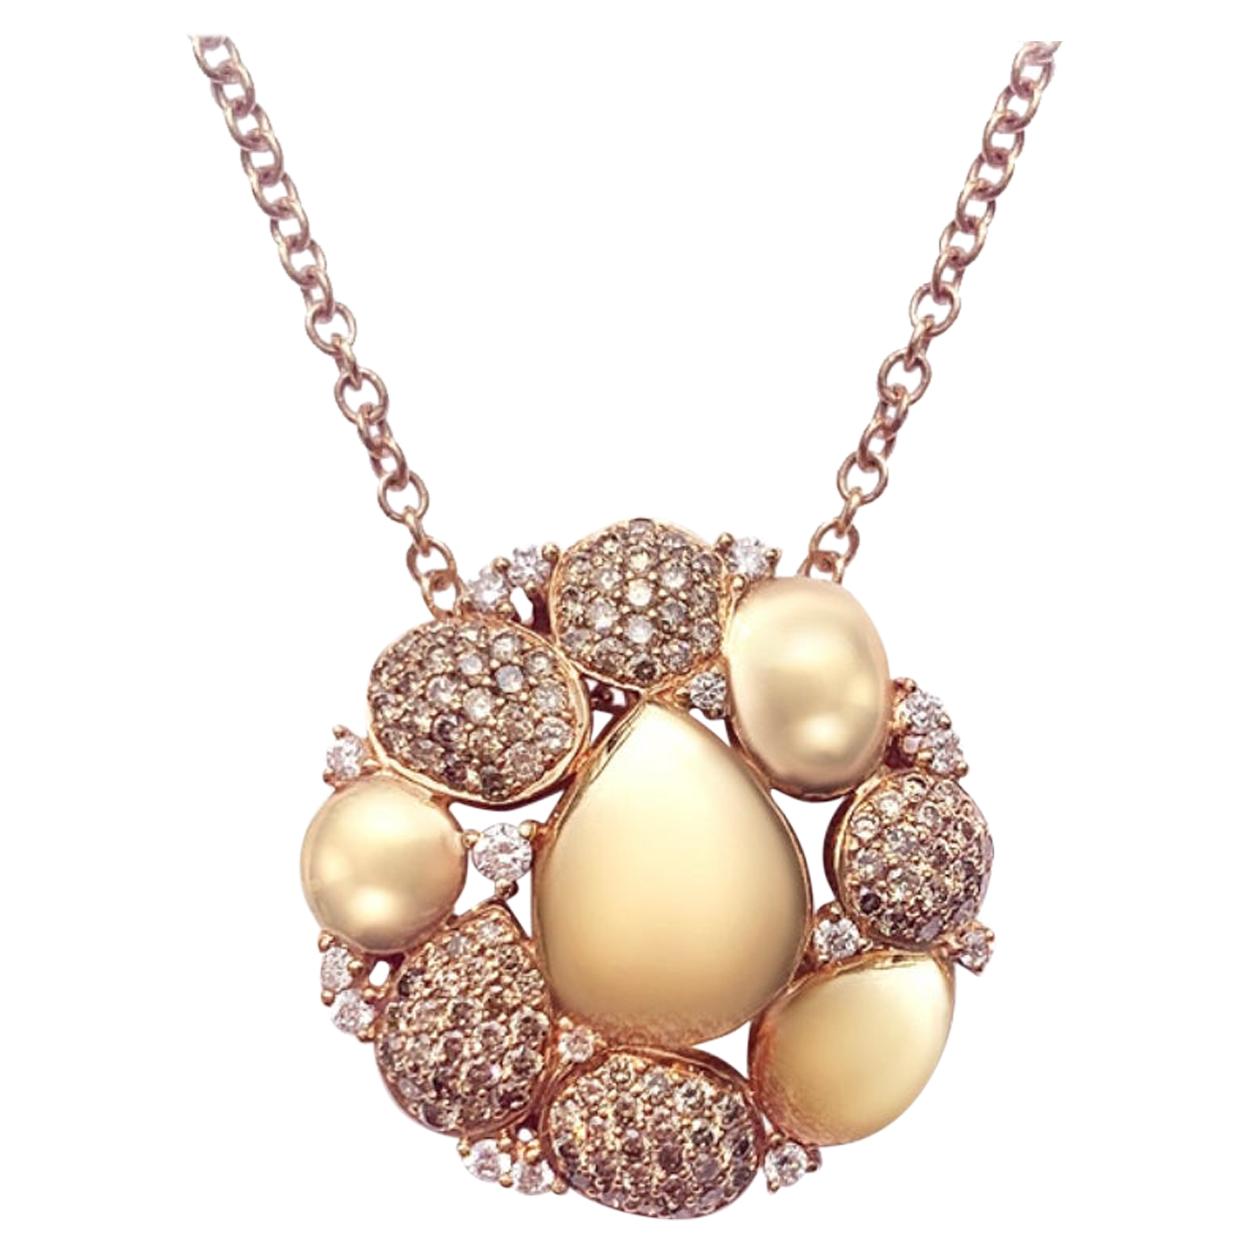 Incredibly Stylish Yellow Gold White Diamond 18 Karat Necklace For Sale